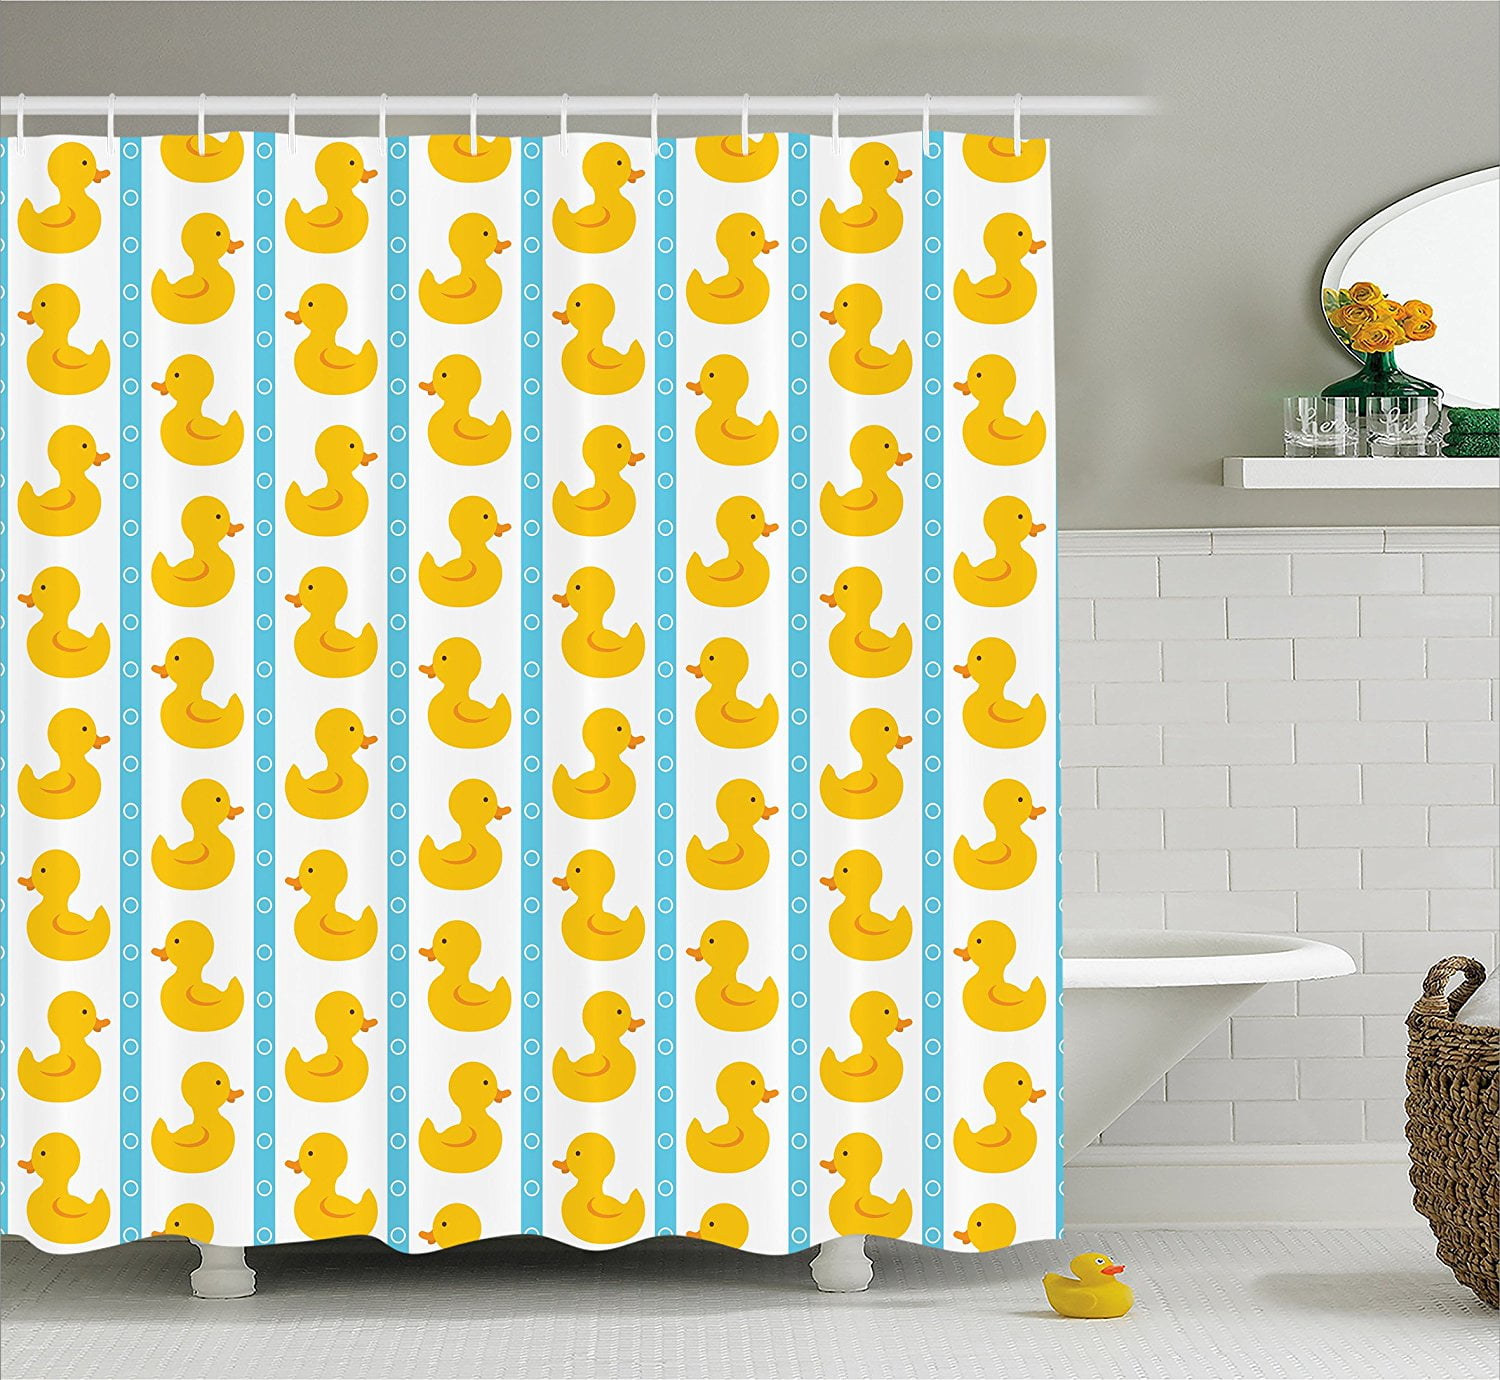 Rubber Duck Shower Curtain Geometry Decor Set with Hooks 4 Sizes Ambesonne 